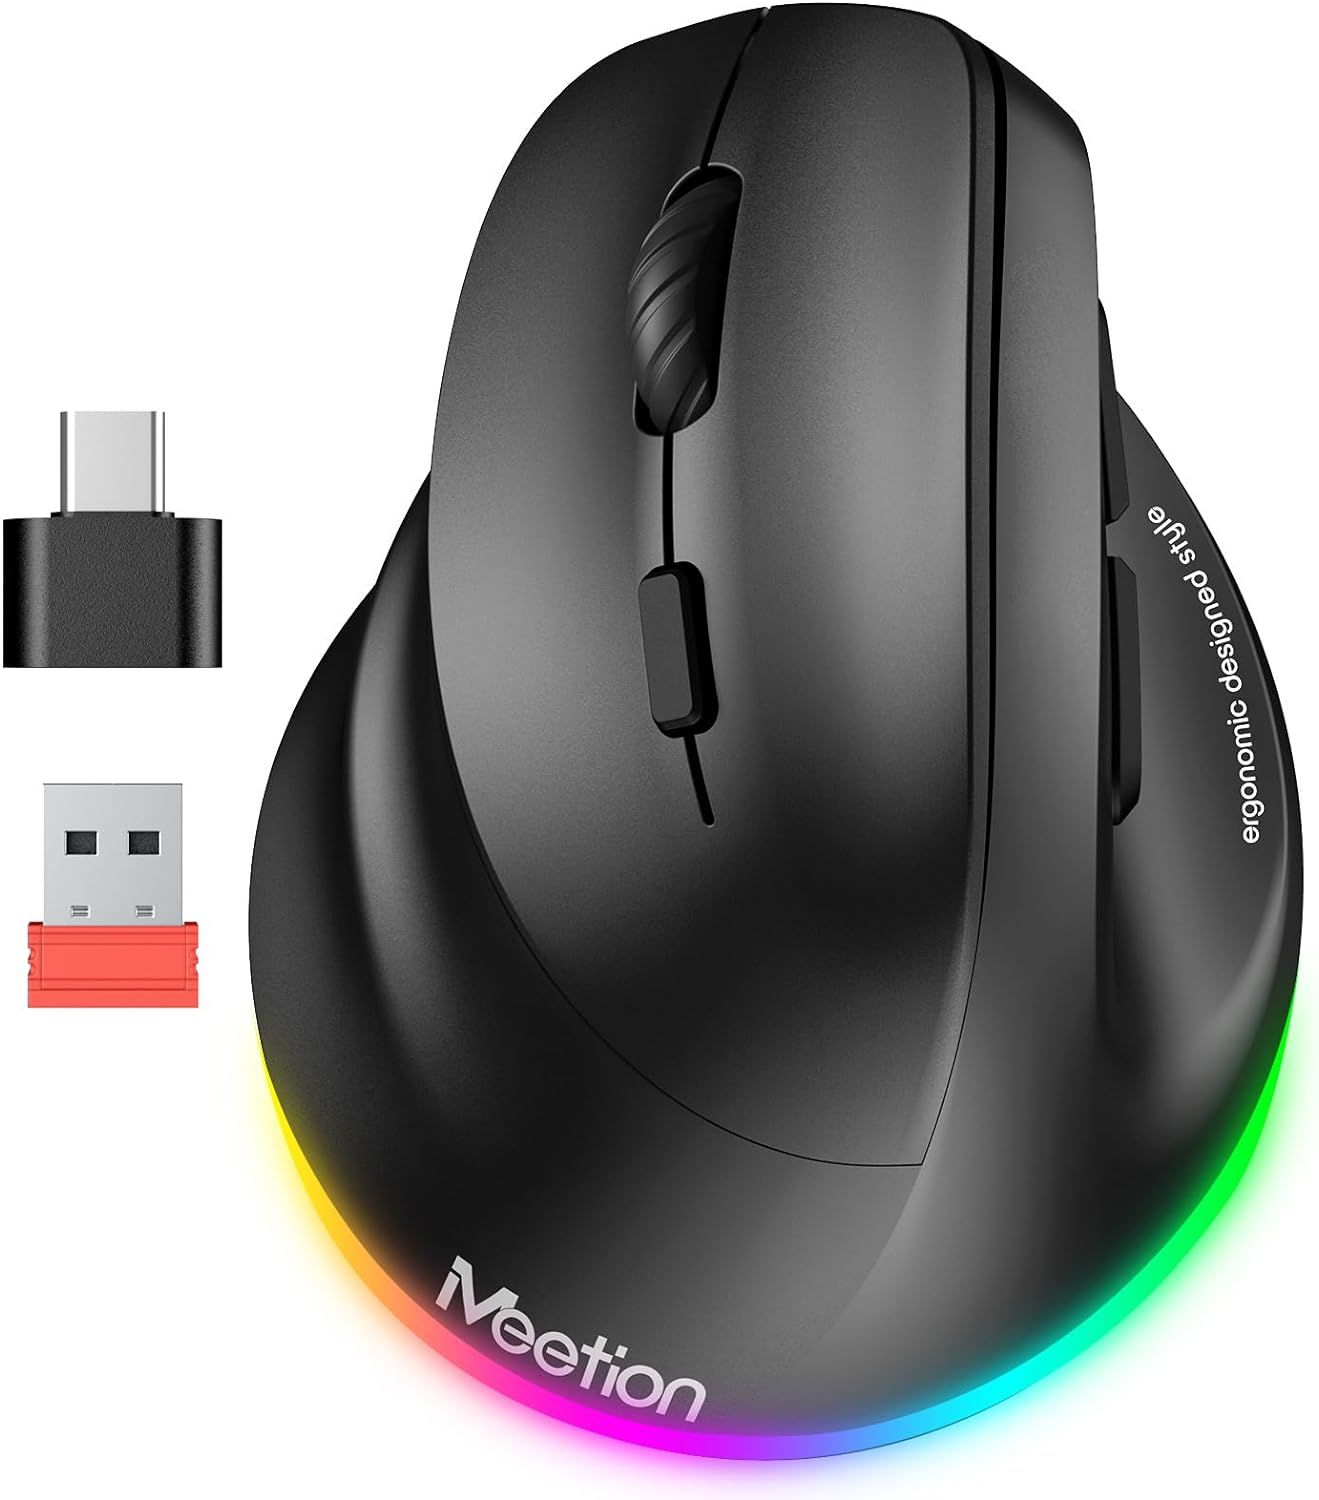 MEETION Wireless Ergonomic Left-Handed Gaming Mouse